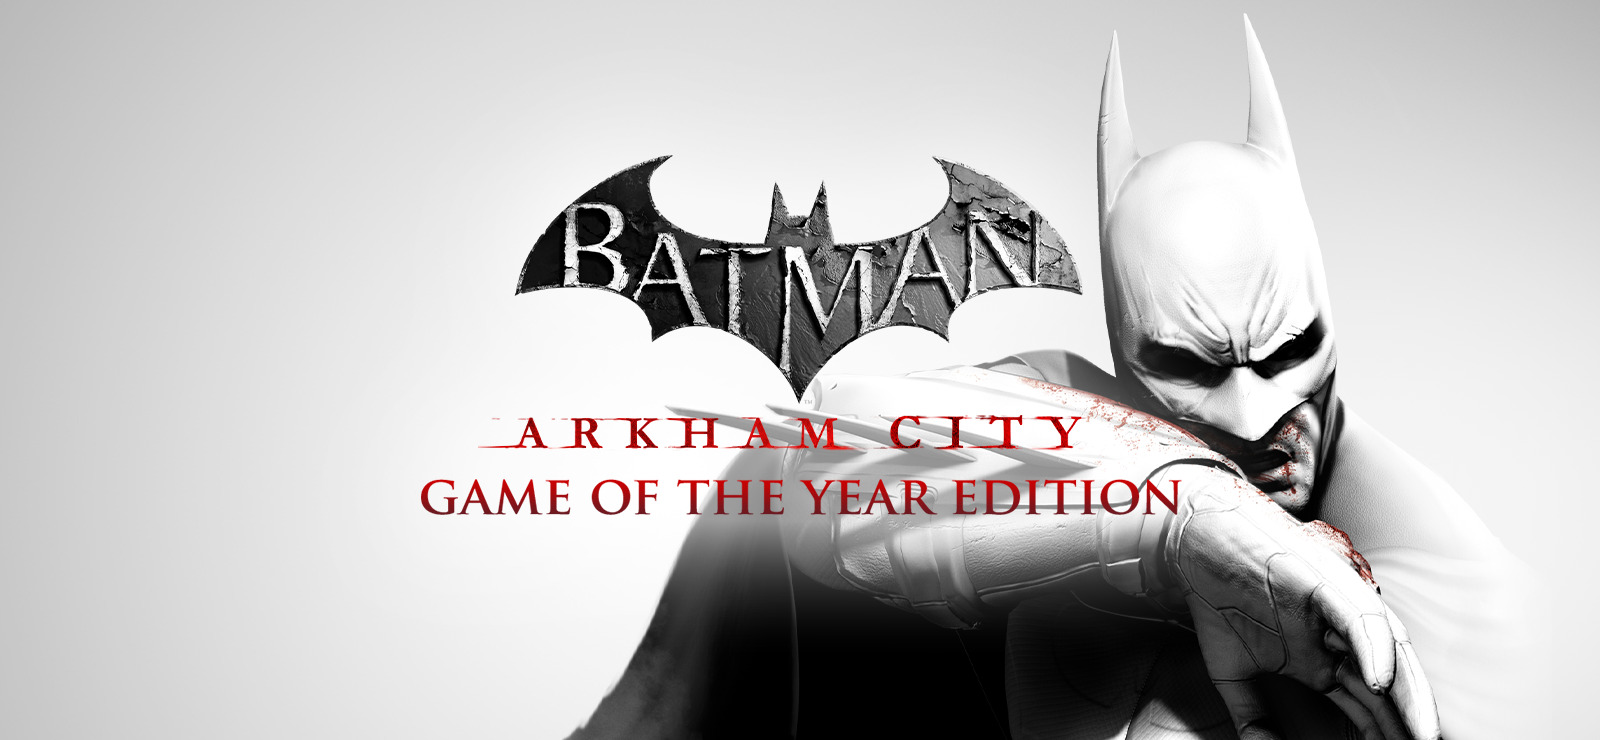 what kind of game is batman arkham knight goty edition for mac